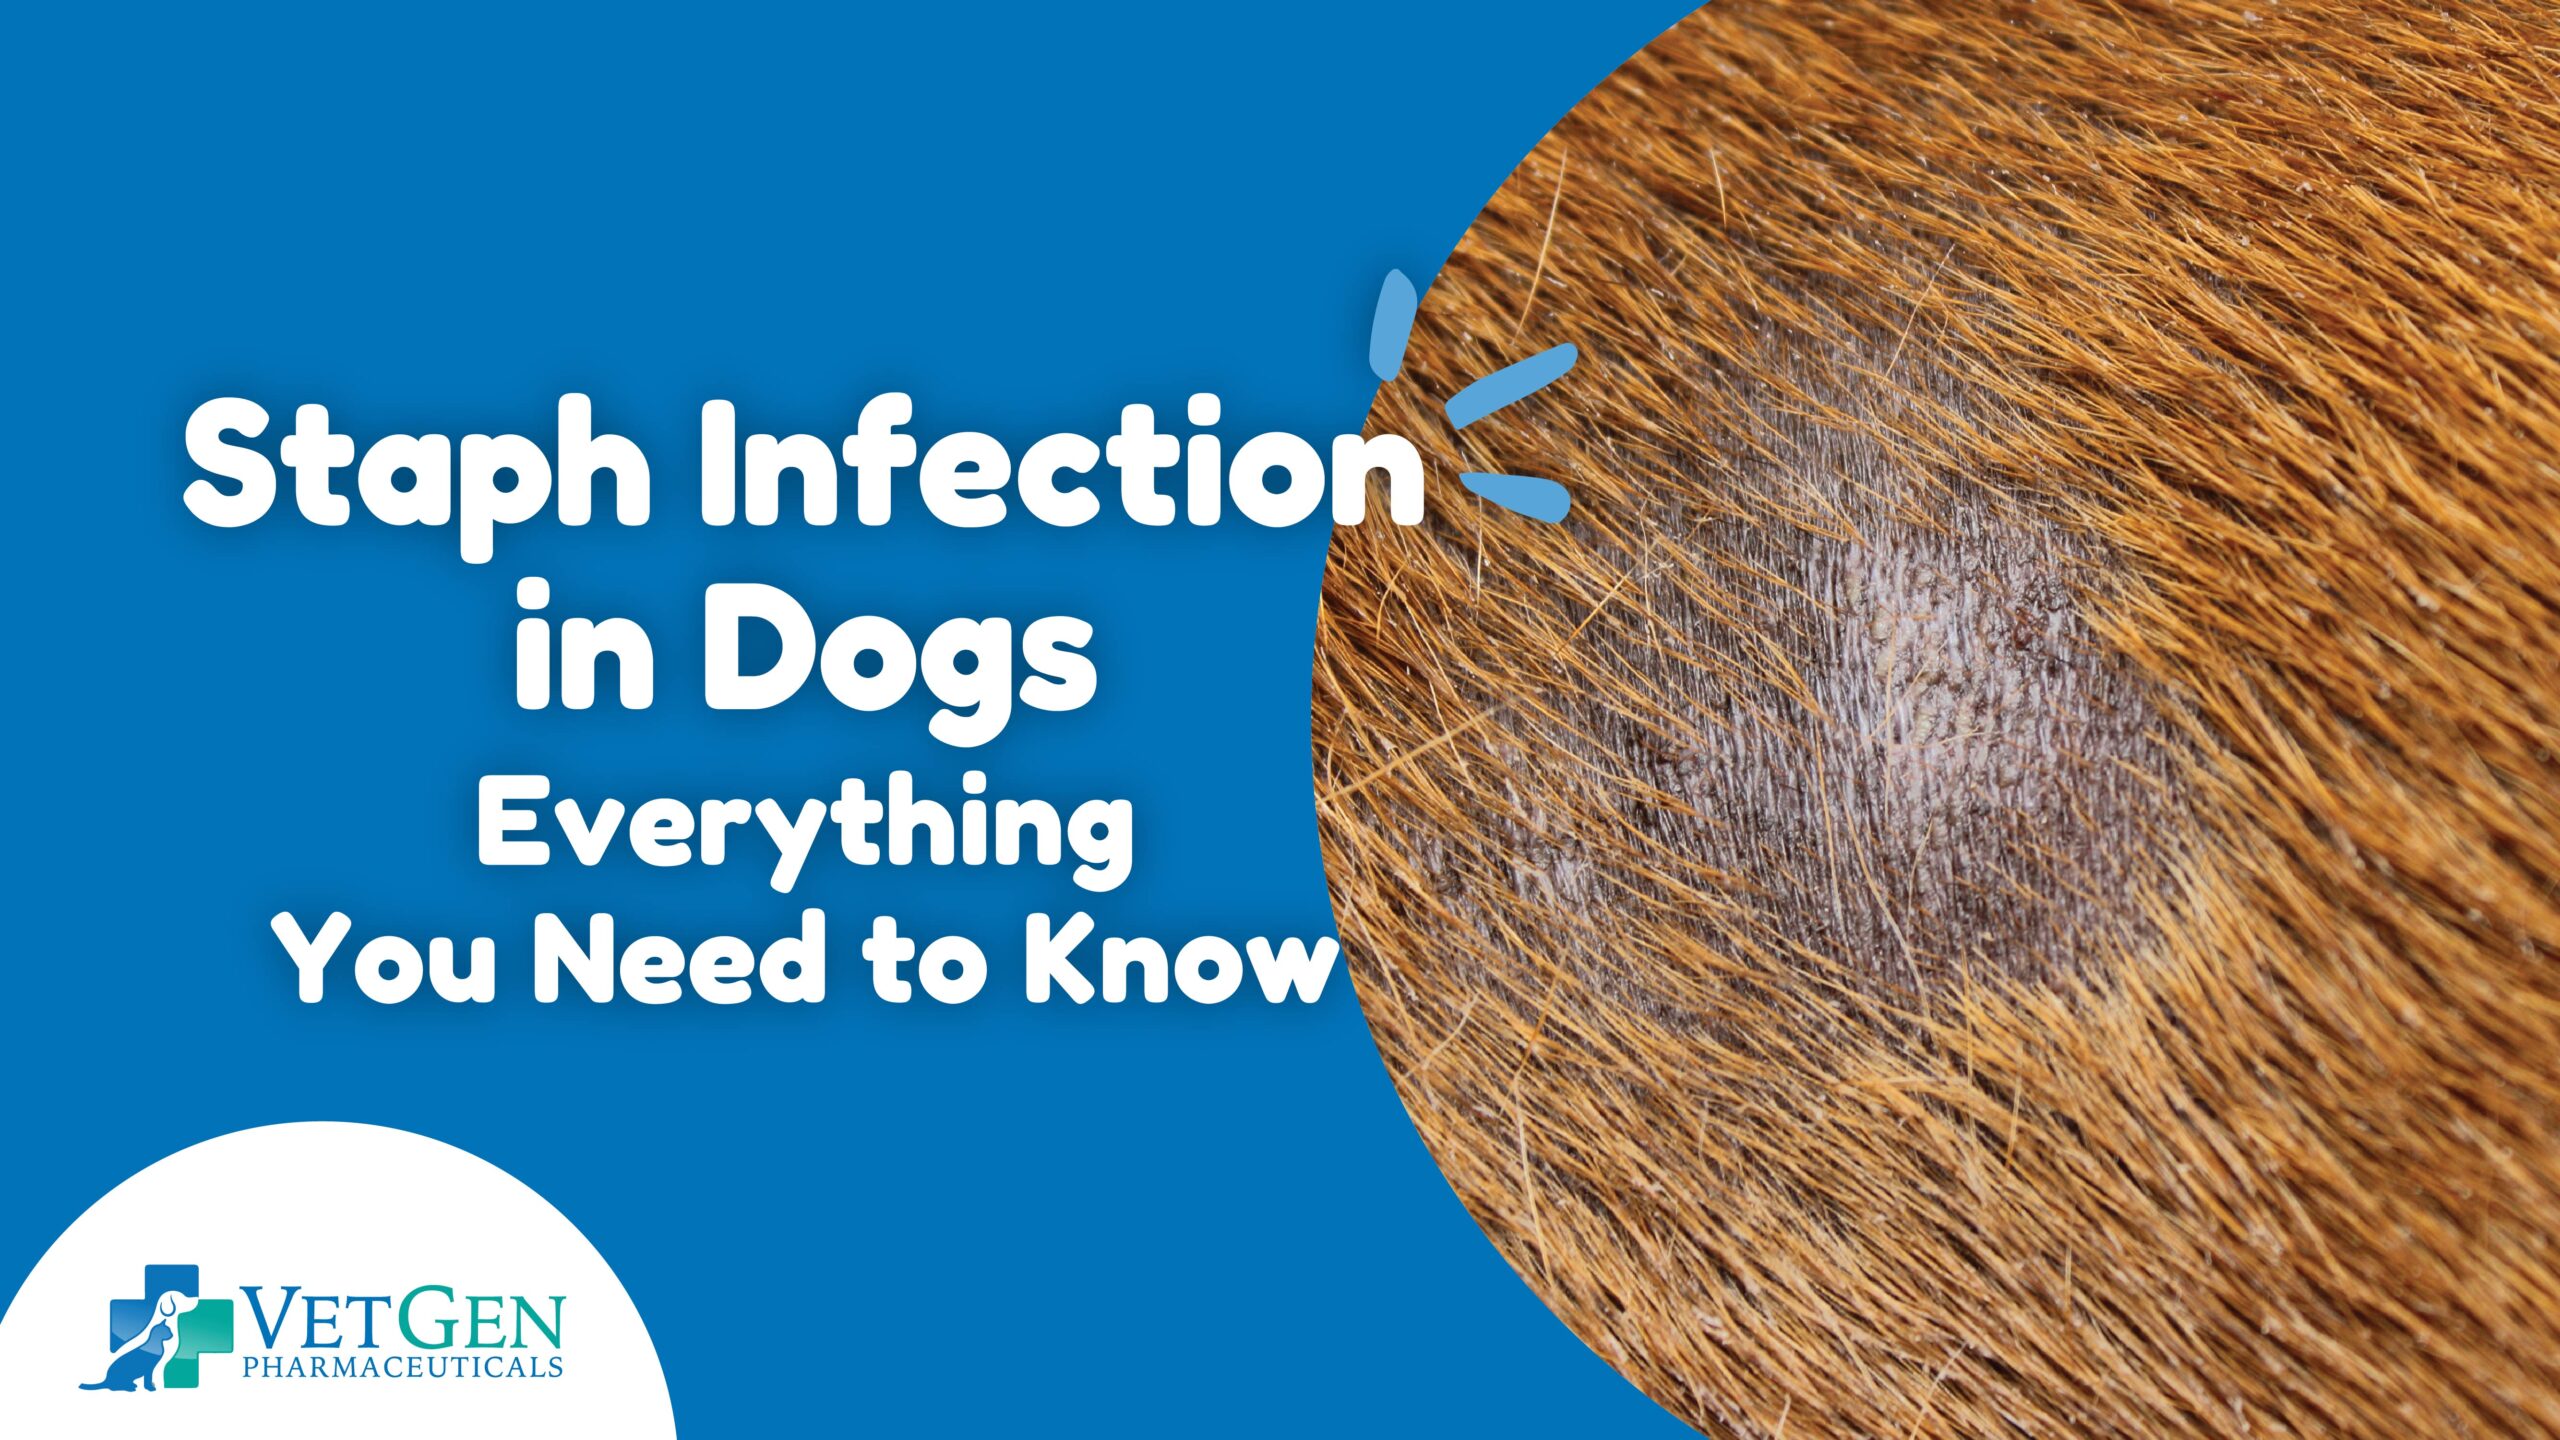 Staph Infection in Dogs – Everything You Need to Know